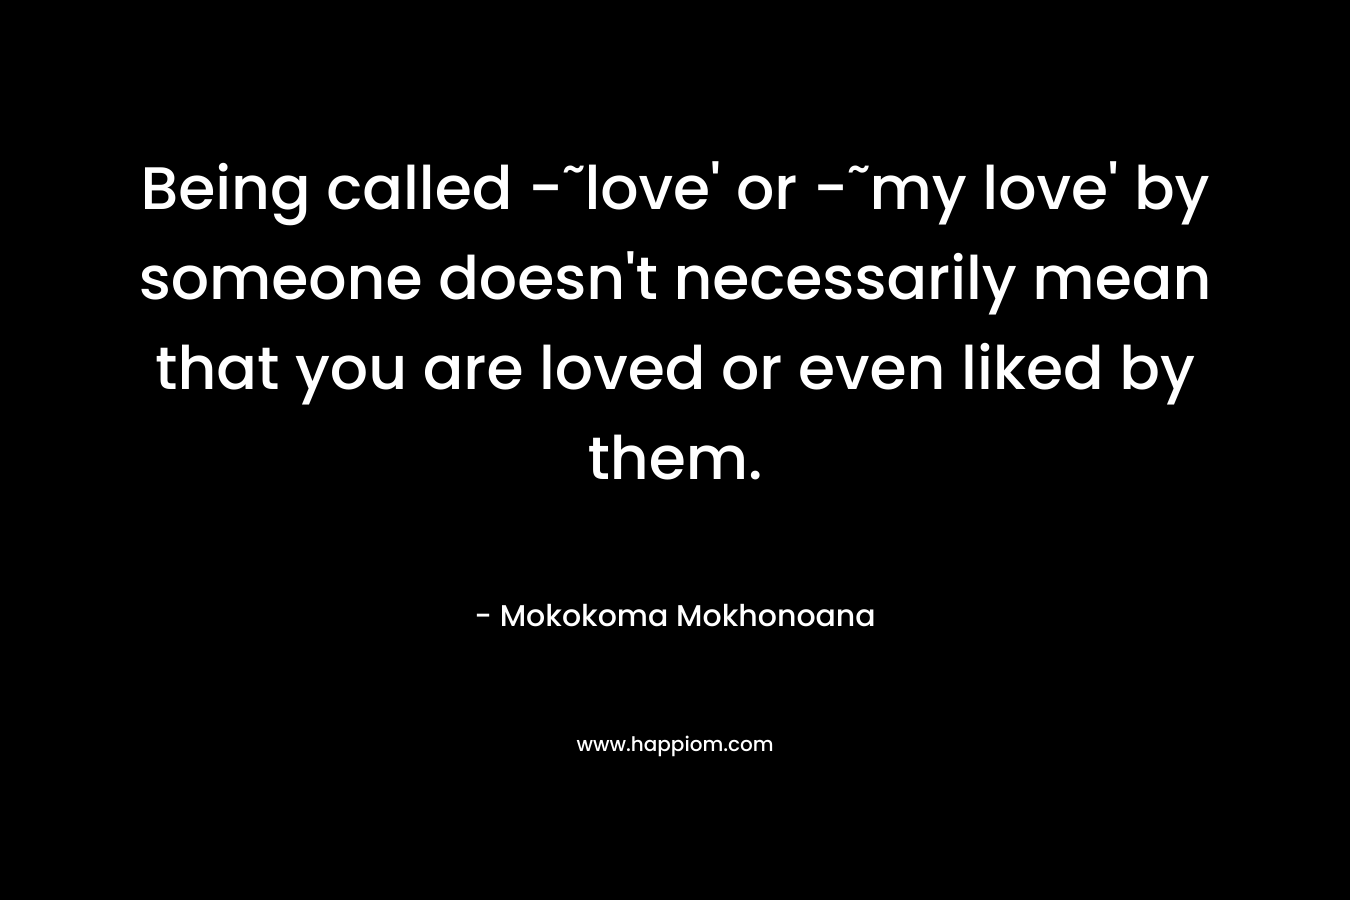 Being called -˜love' or -˜my love' by someone doesn't necessarily mean that you are loved or even liked by them.